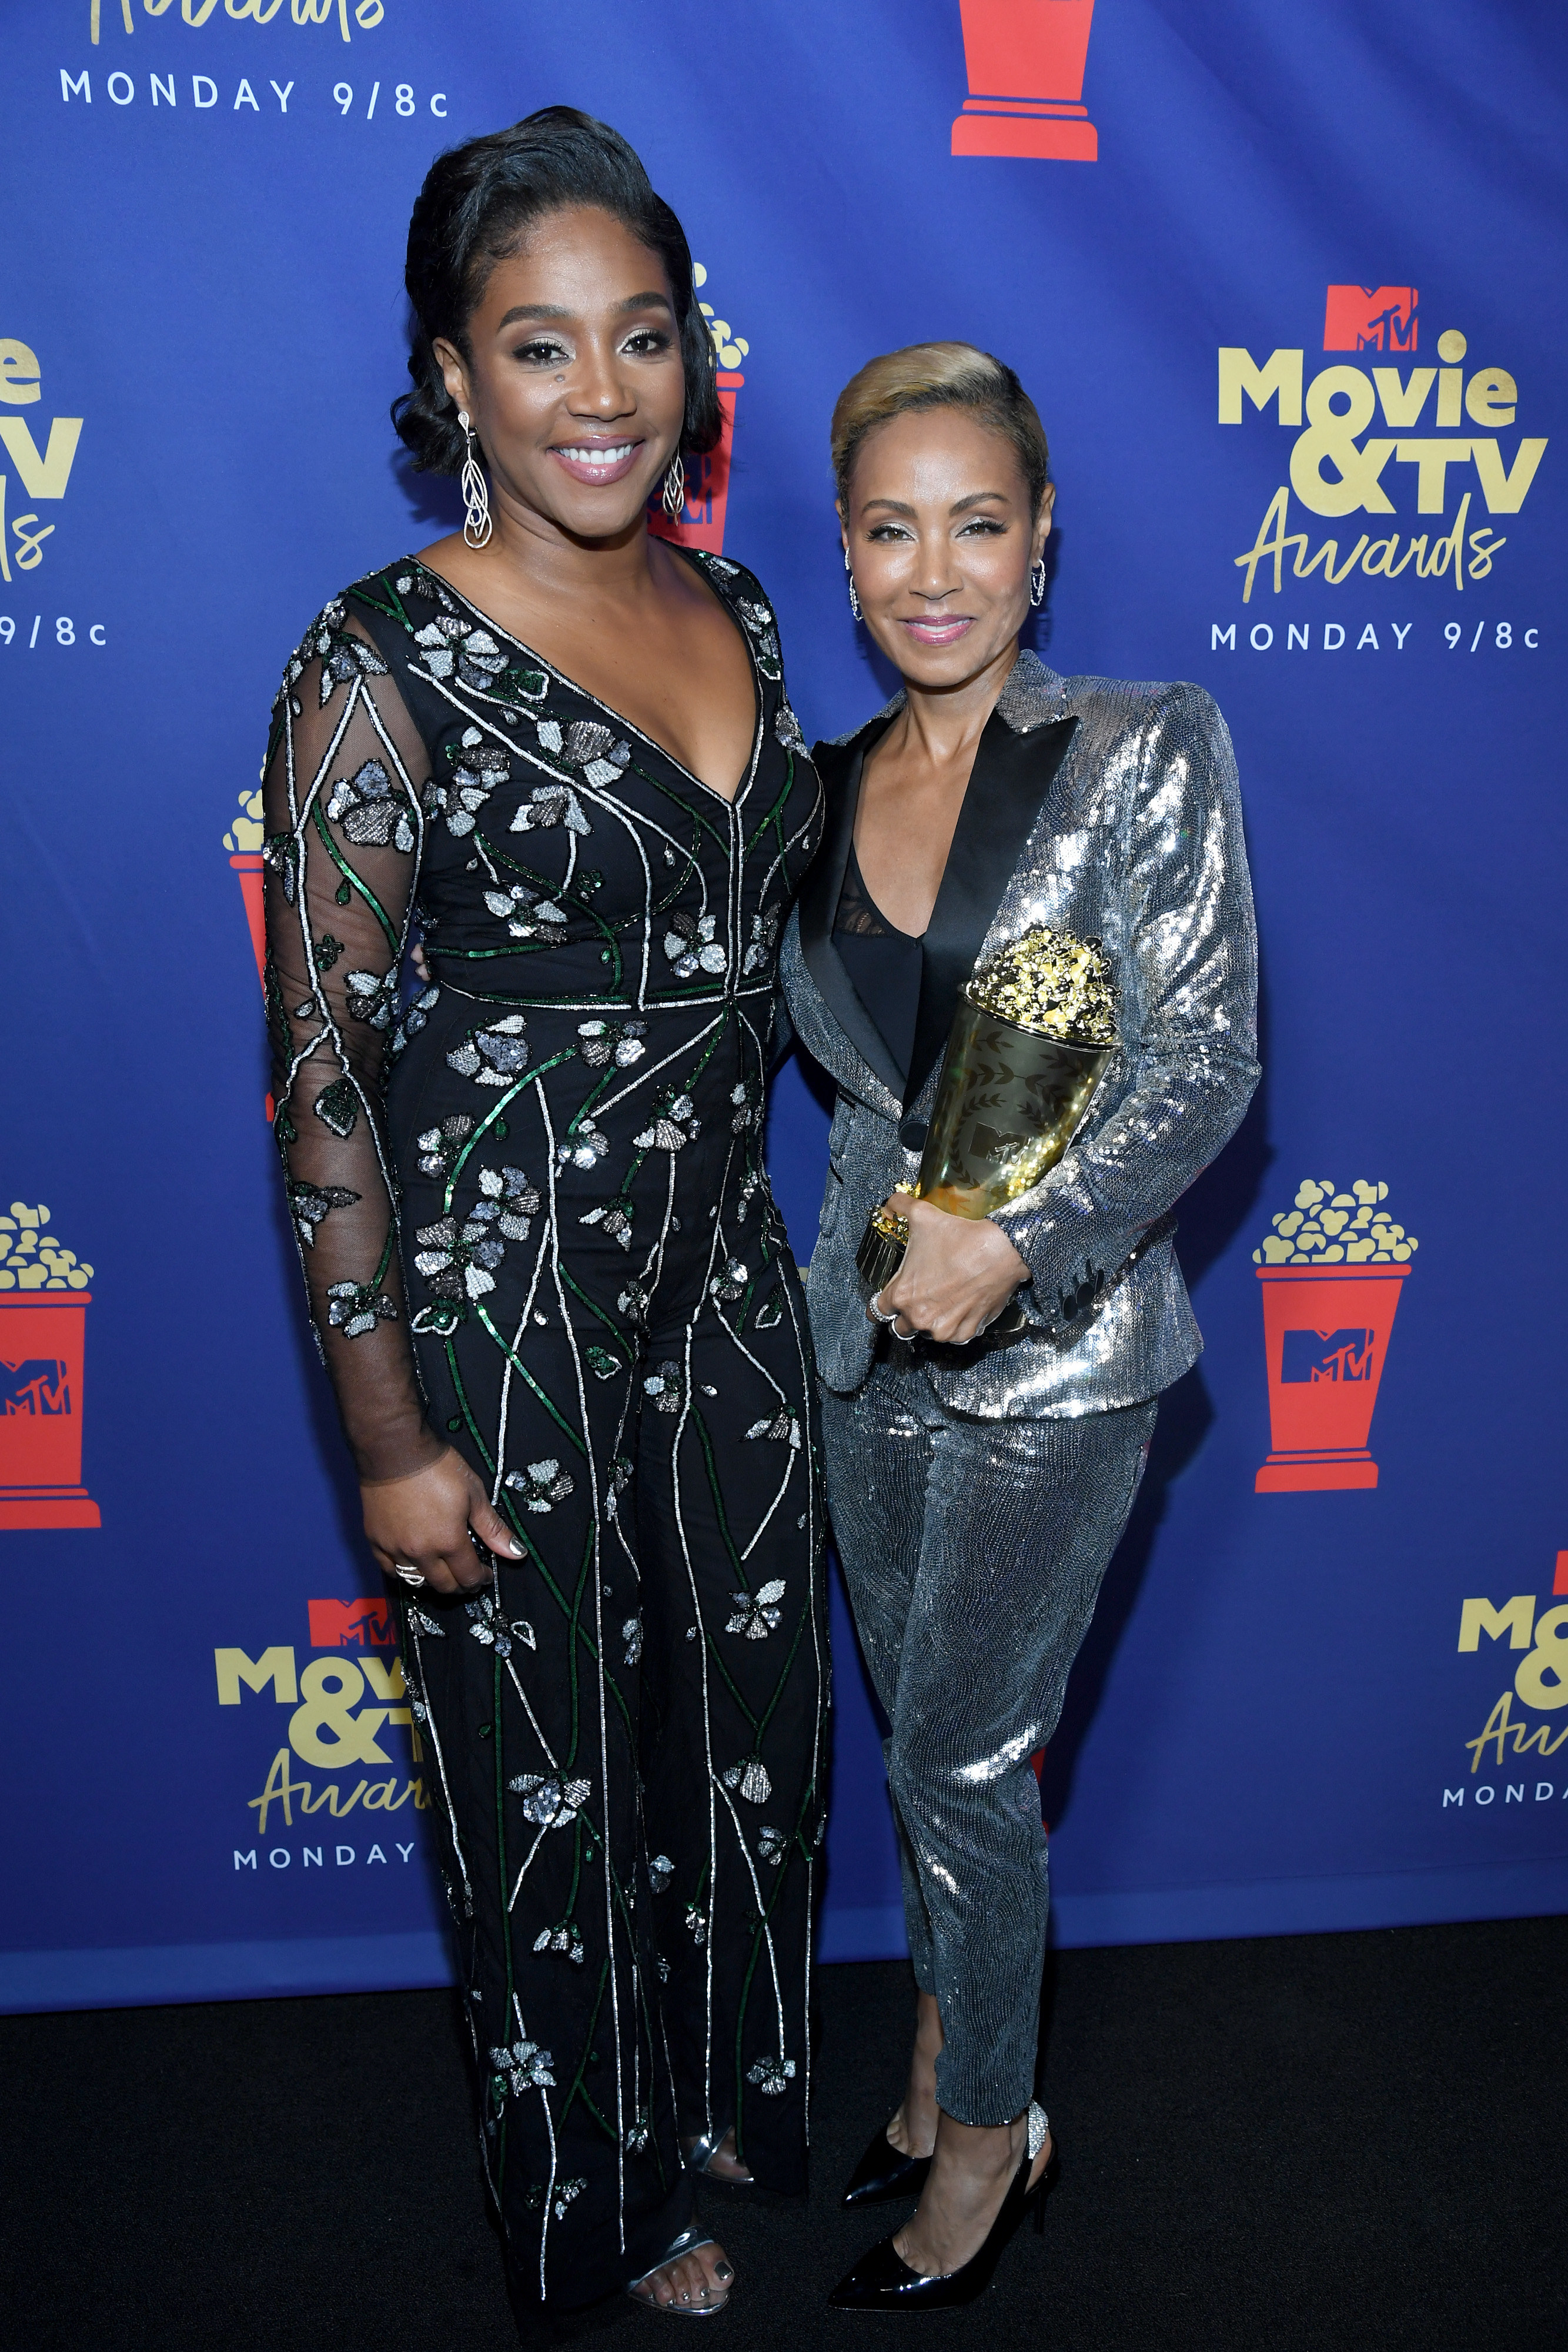 Tiffany Haddish and Jada Pinkett Smith pose together as they arrive at the 2019 MTV Movie and TV Awards